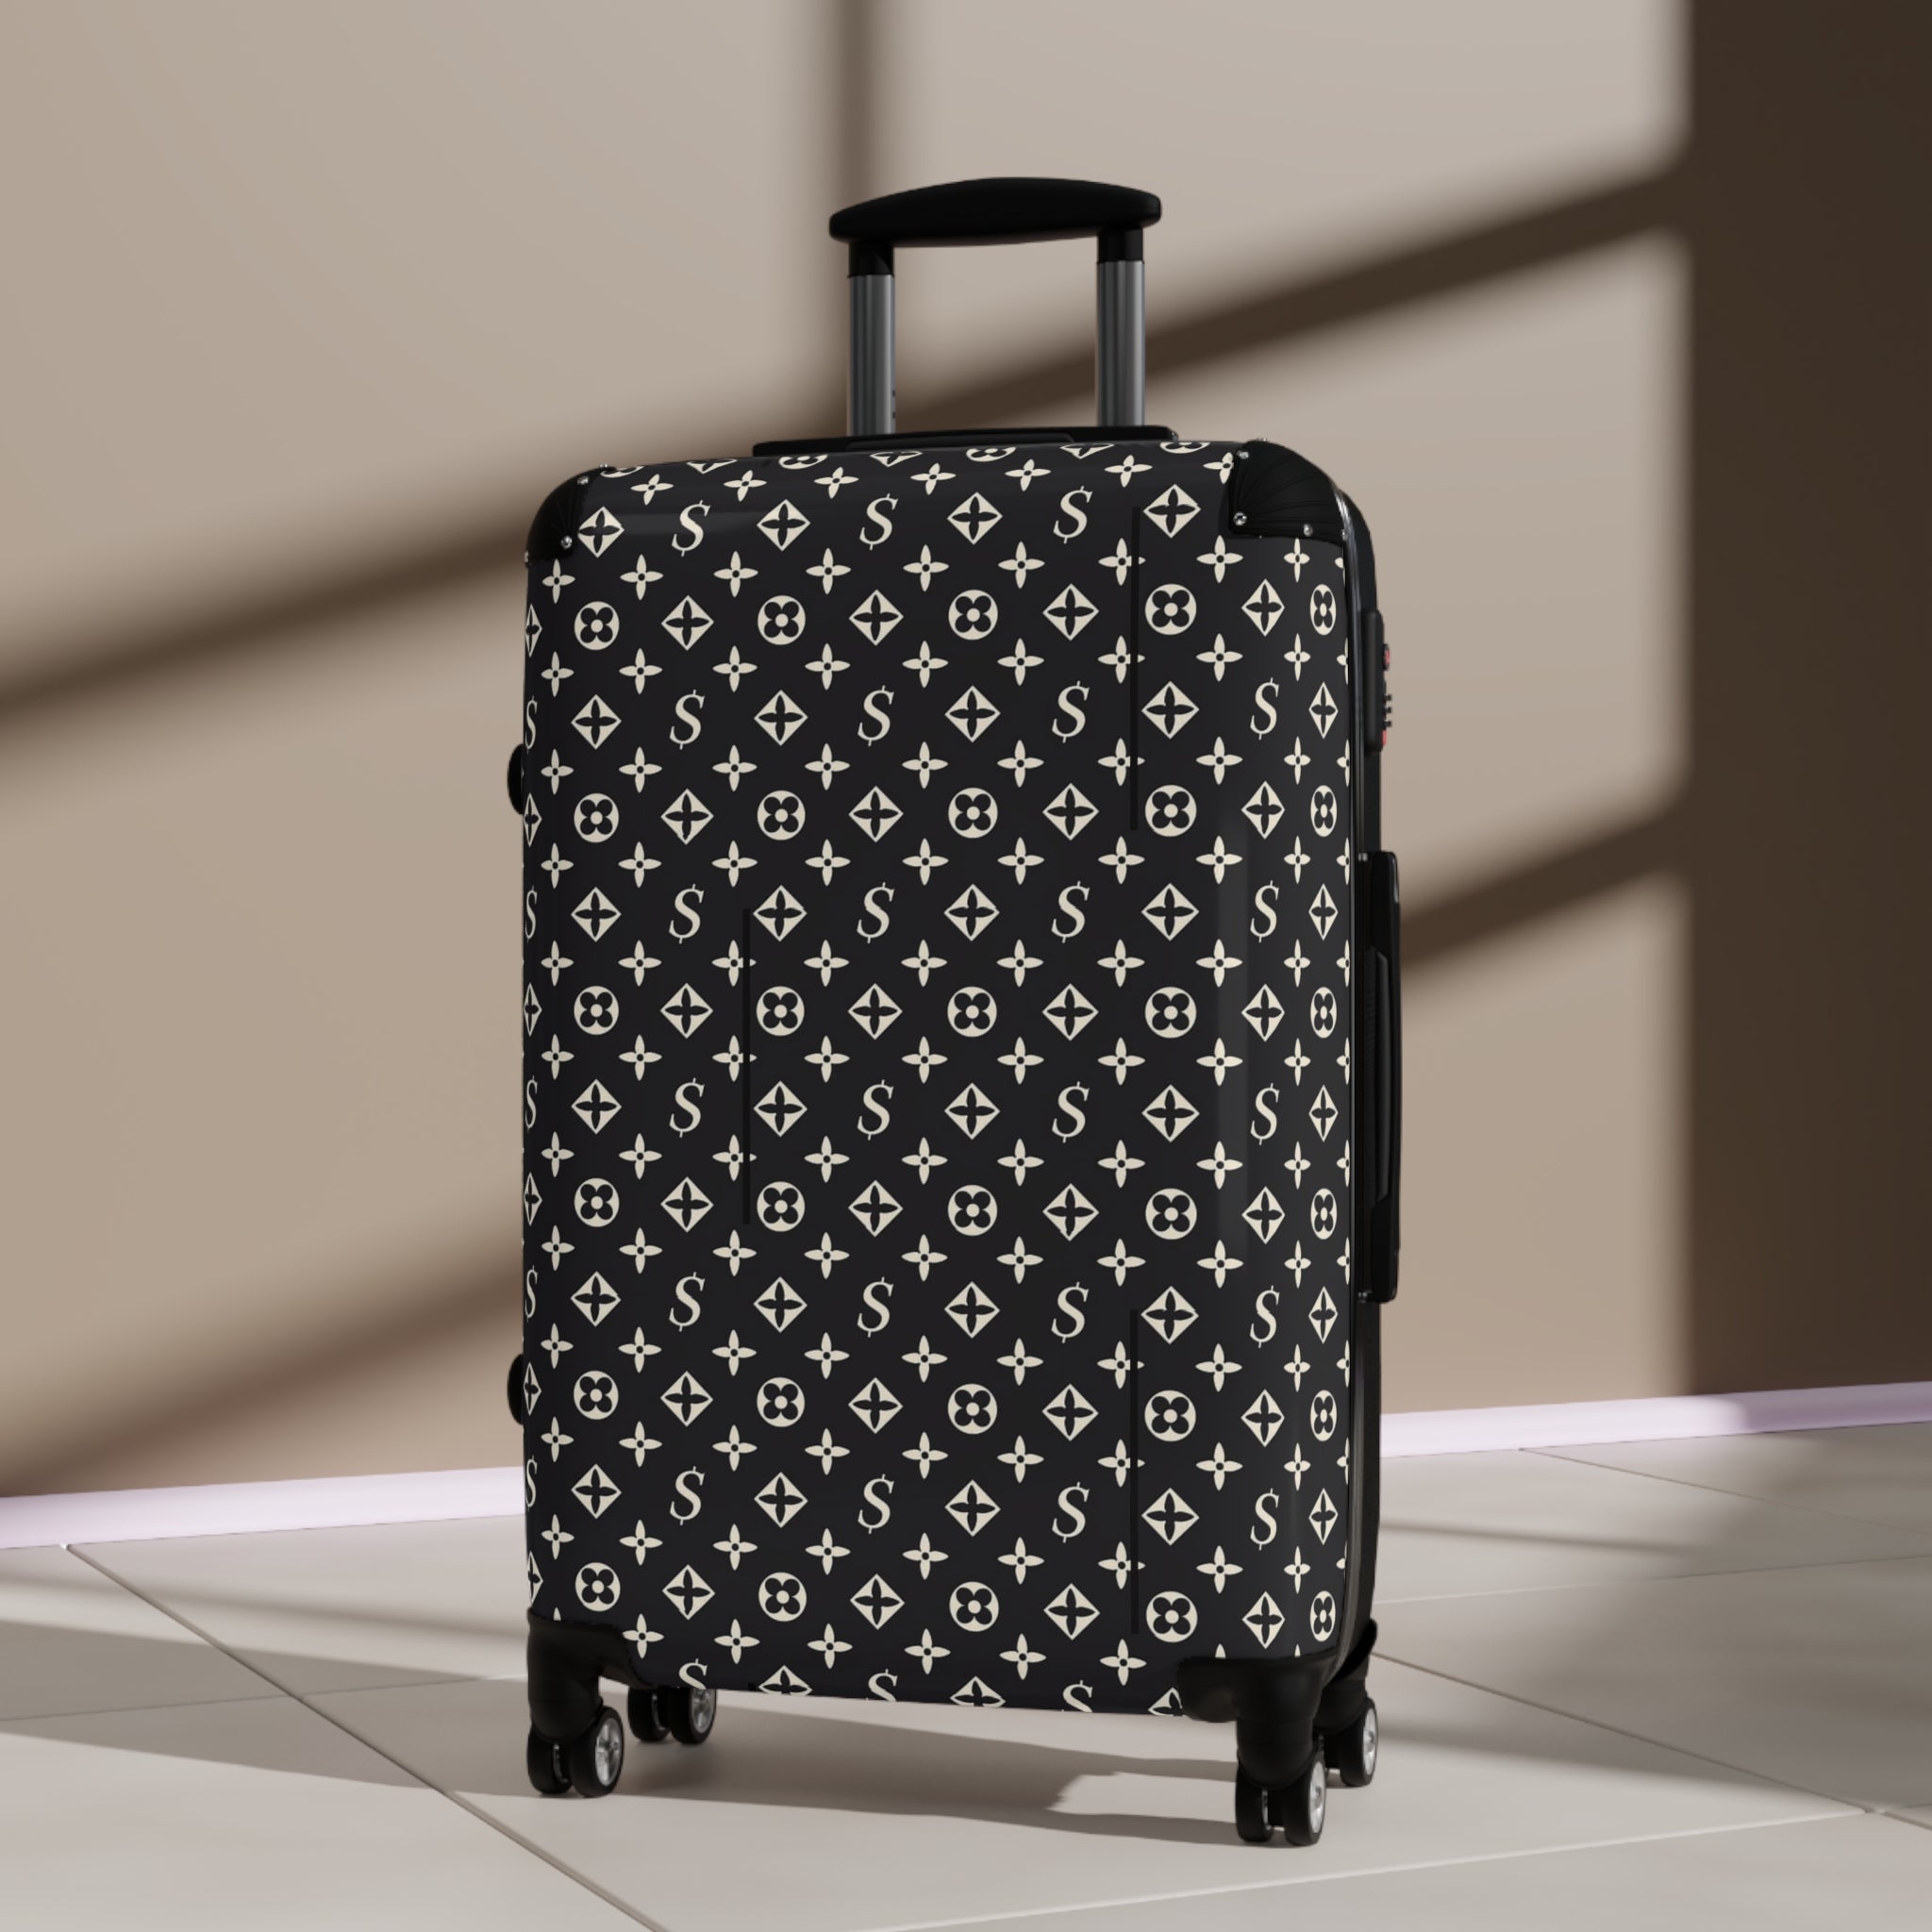 Abby Travel Collection Abby Travel Collection Black and White Icons Suitcase, Hard Shell Luggage, Rolling Suitcase for Travel, Carry On Bag Bags  The Middle Aged Groove